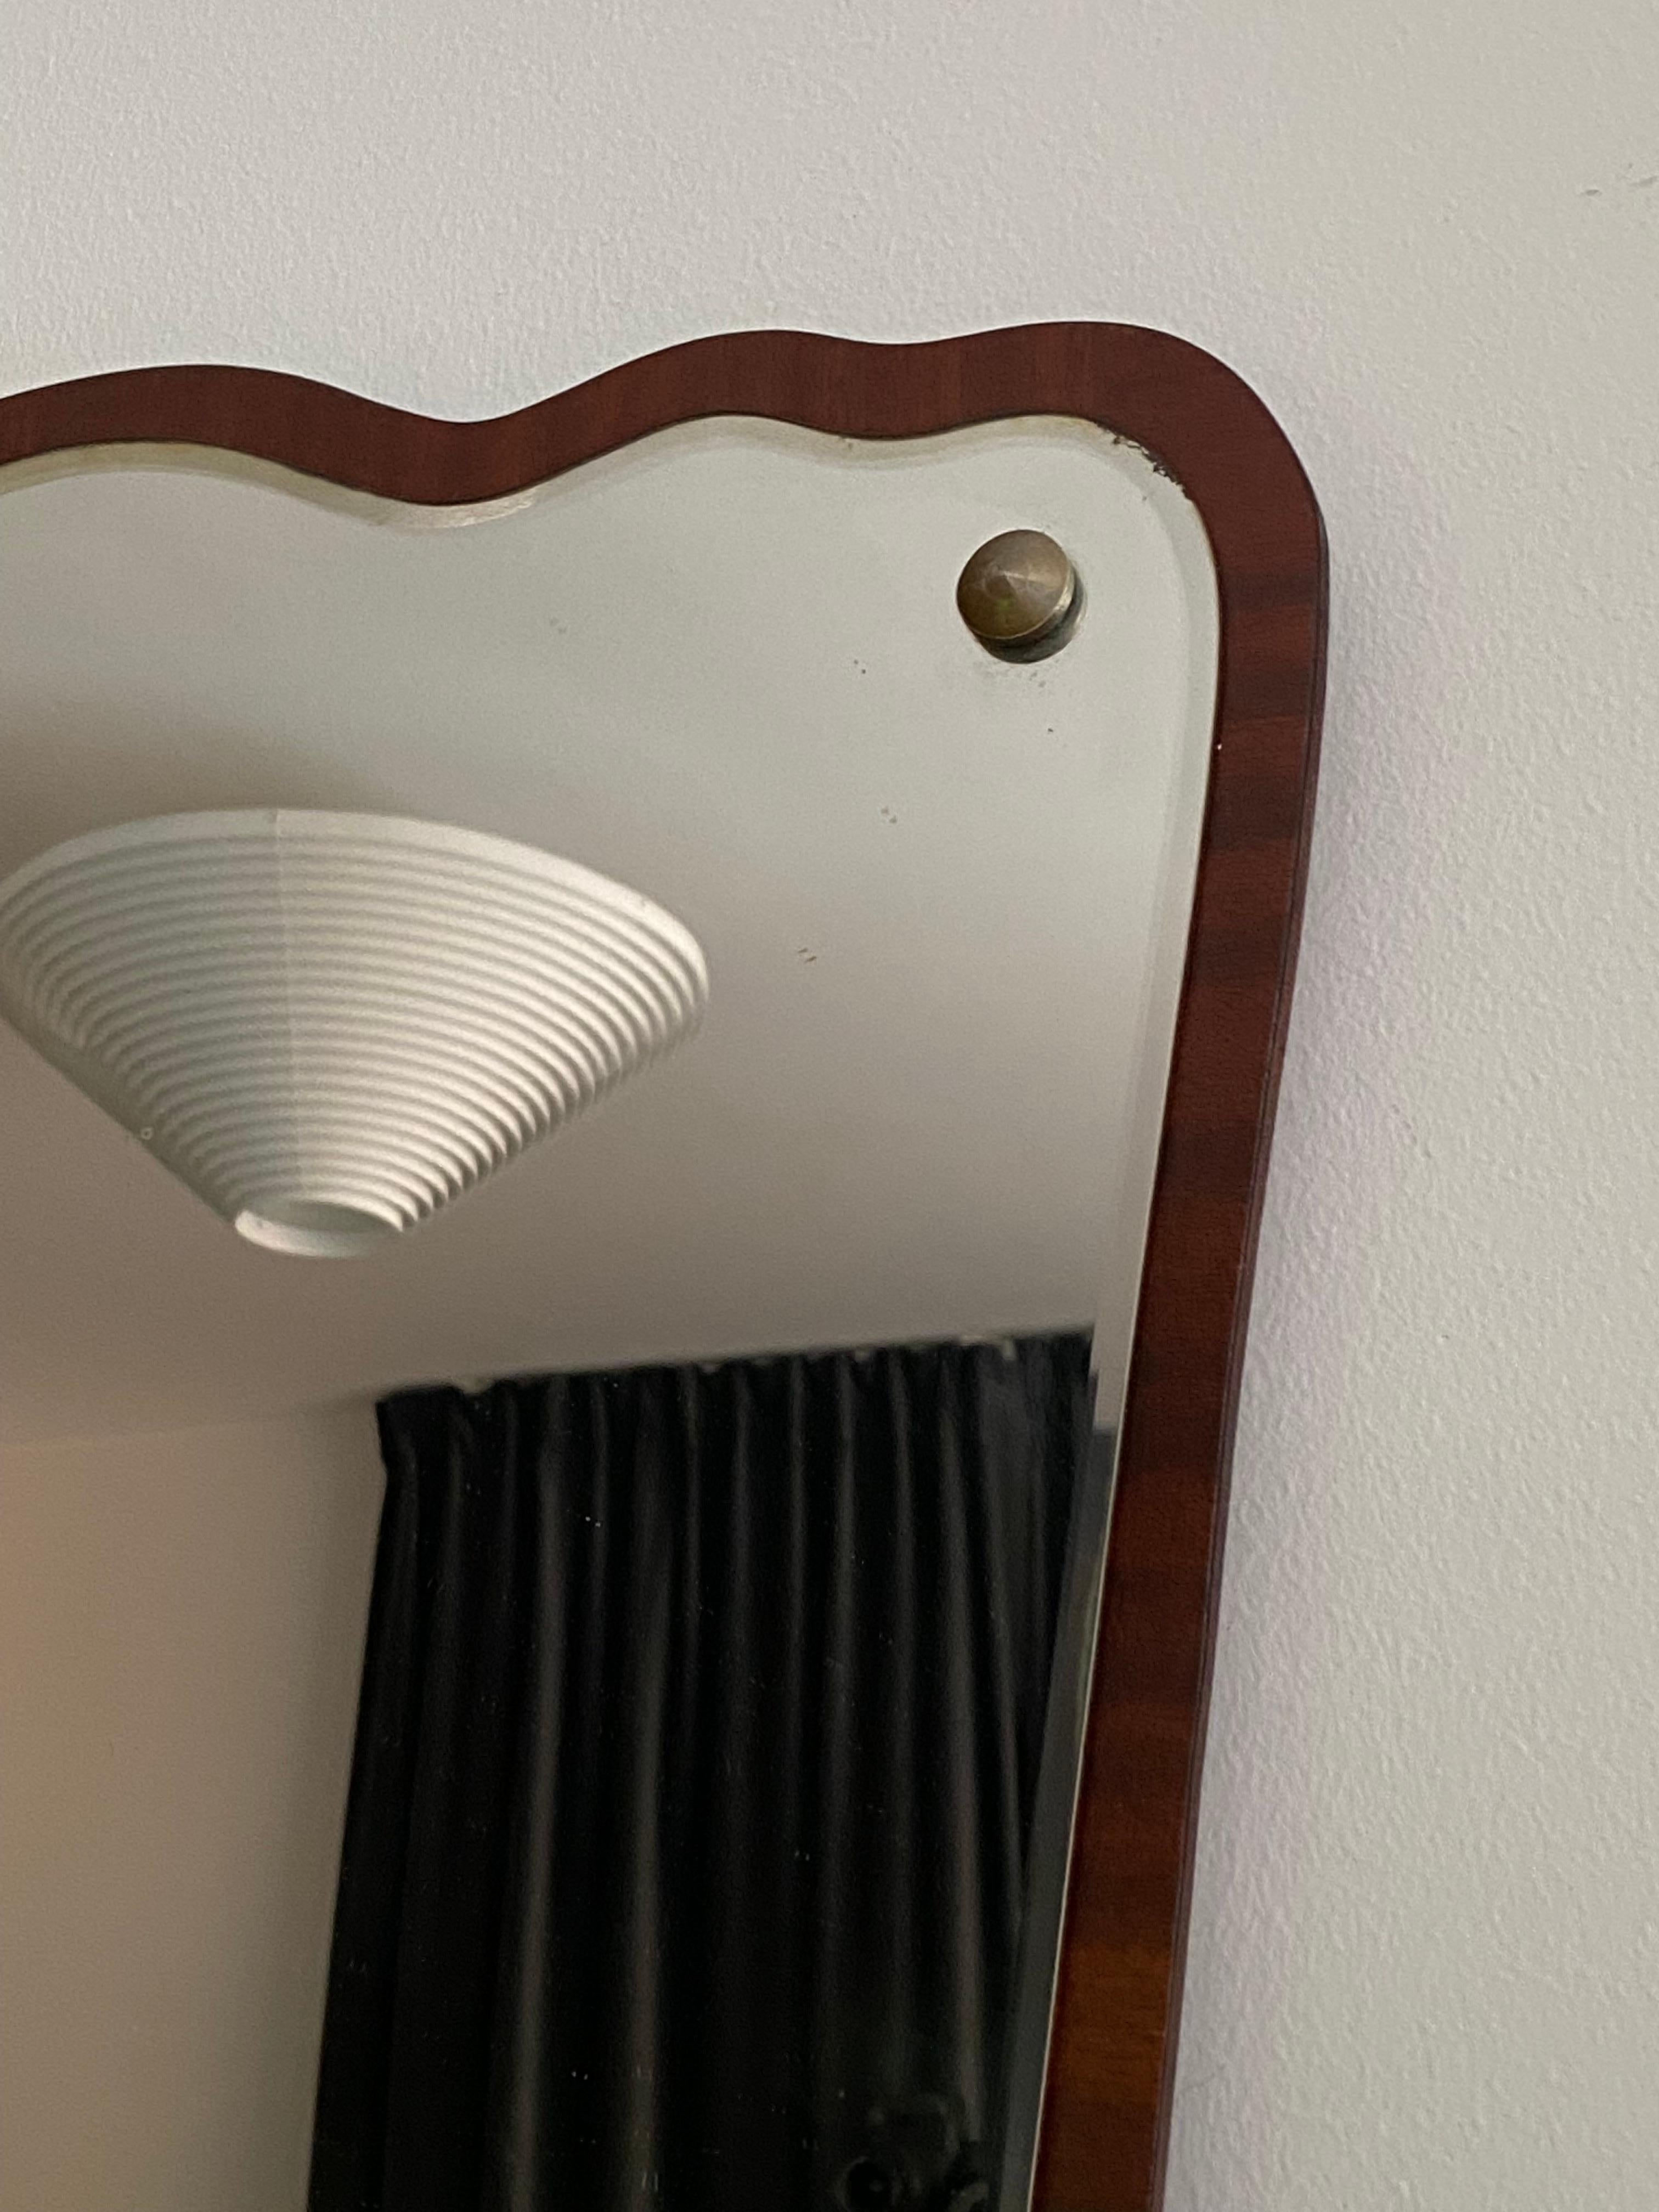 An organic wall mirror, Sweden. In sculpted teak and crystal mirror glass. 

Other designers of the period working in the organic style include Fontana Arte, Gio Ponti, and Paolo Buffa.